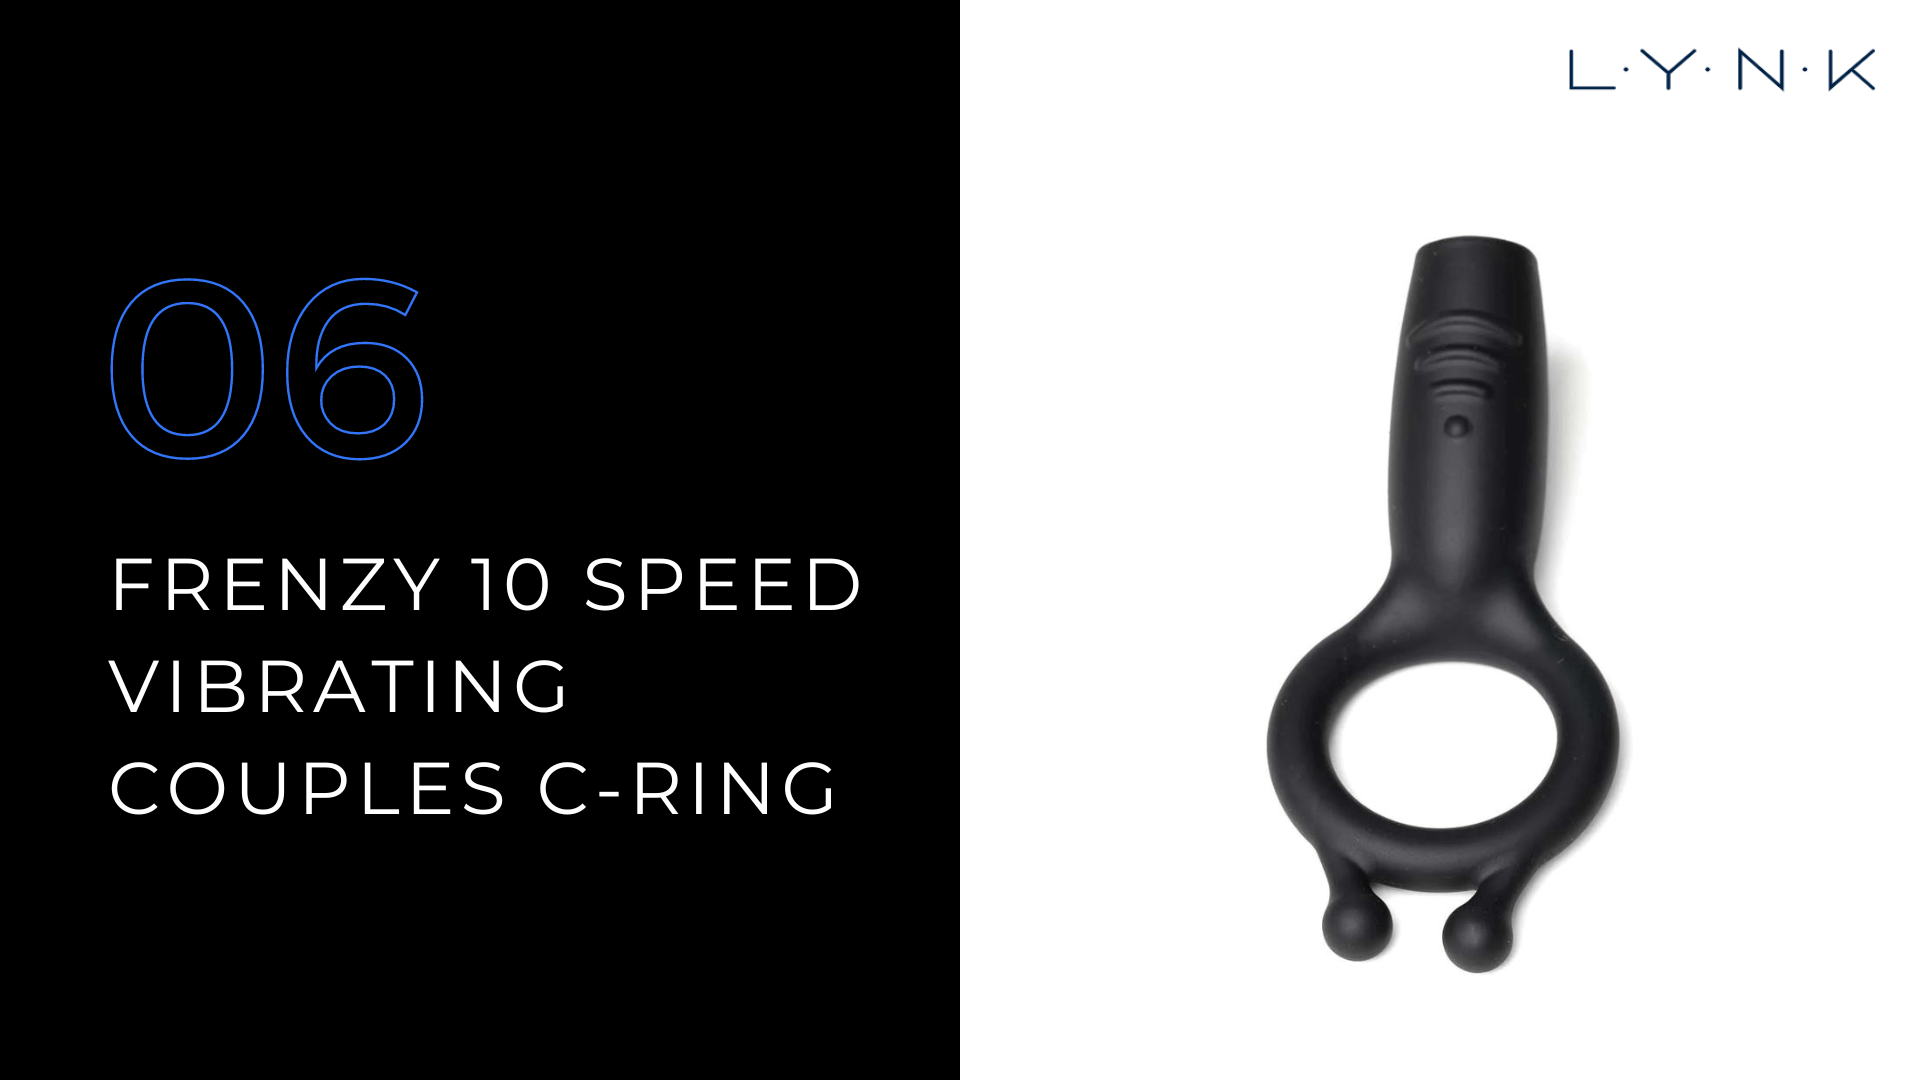 Frenzy 10 Speed Vibrating Couples C-Ring